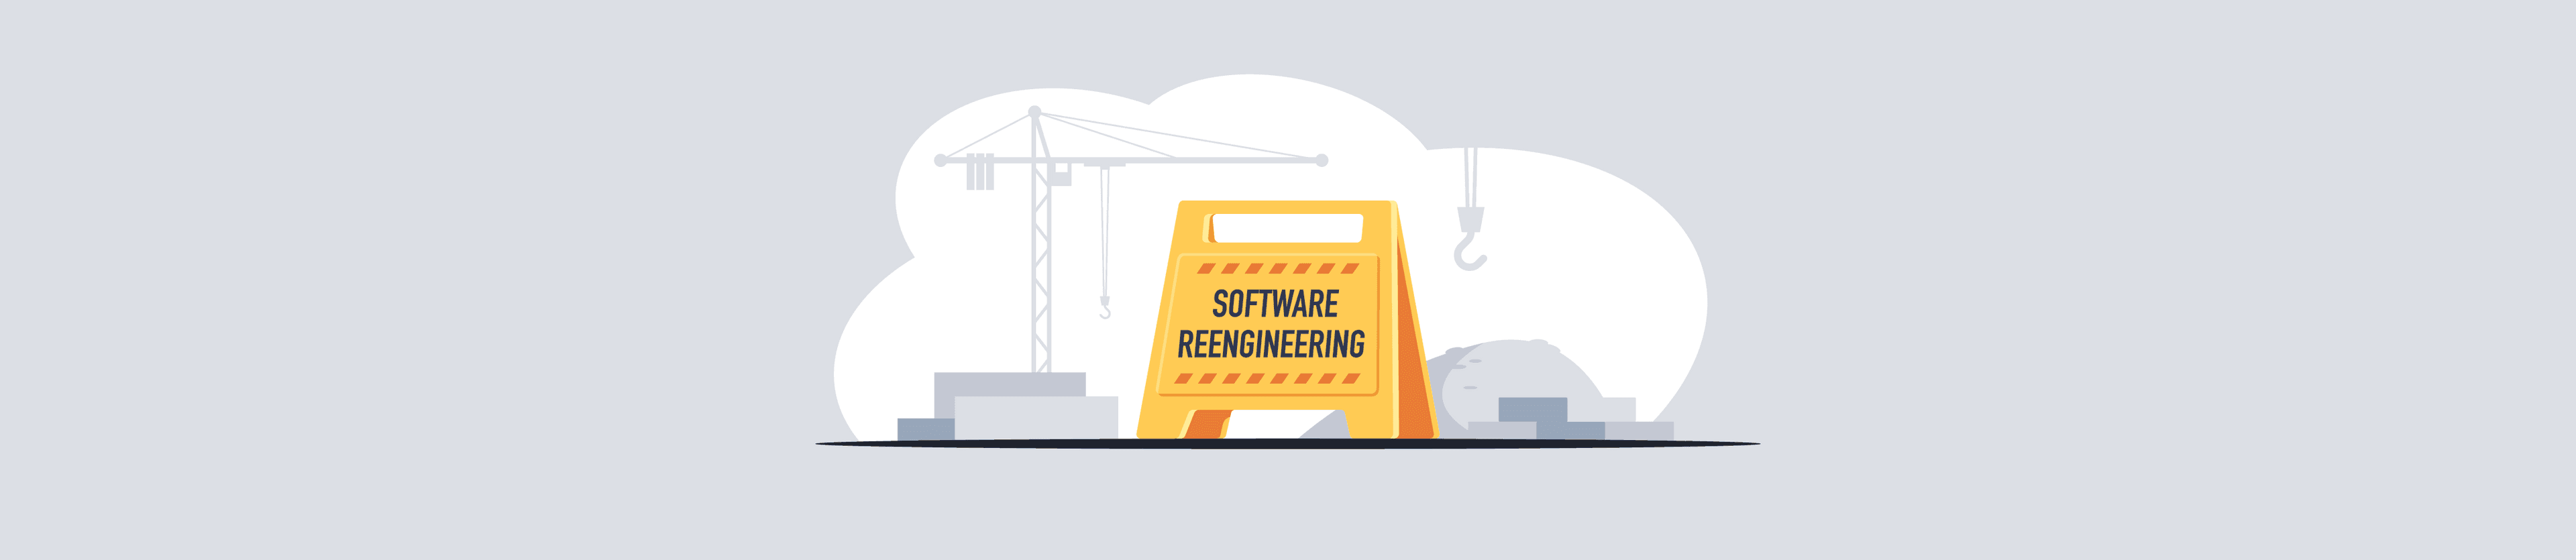 What is Software Reengineering?